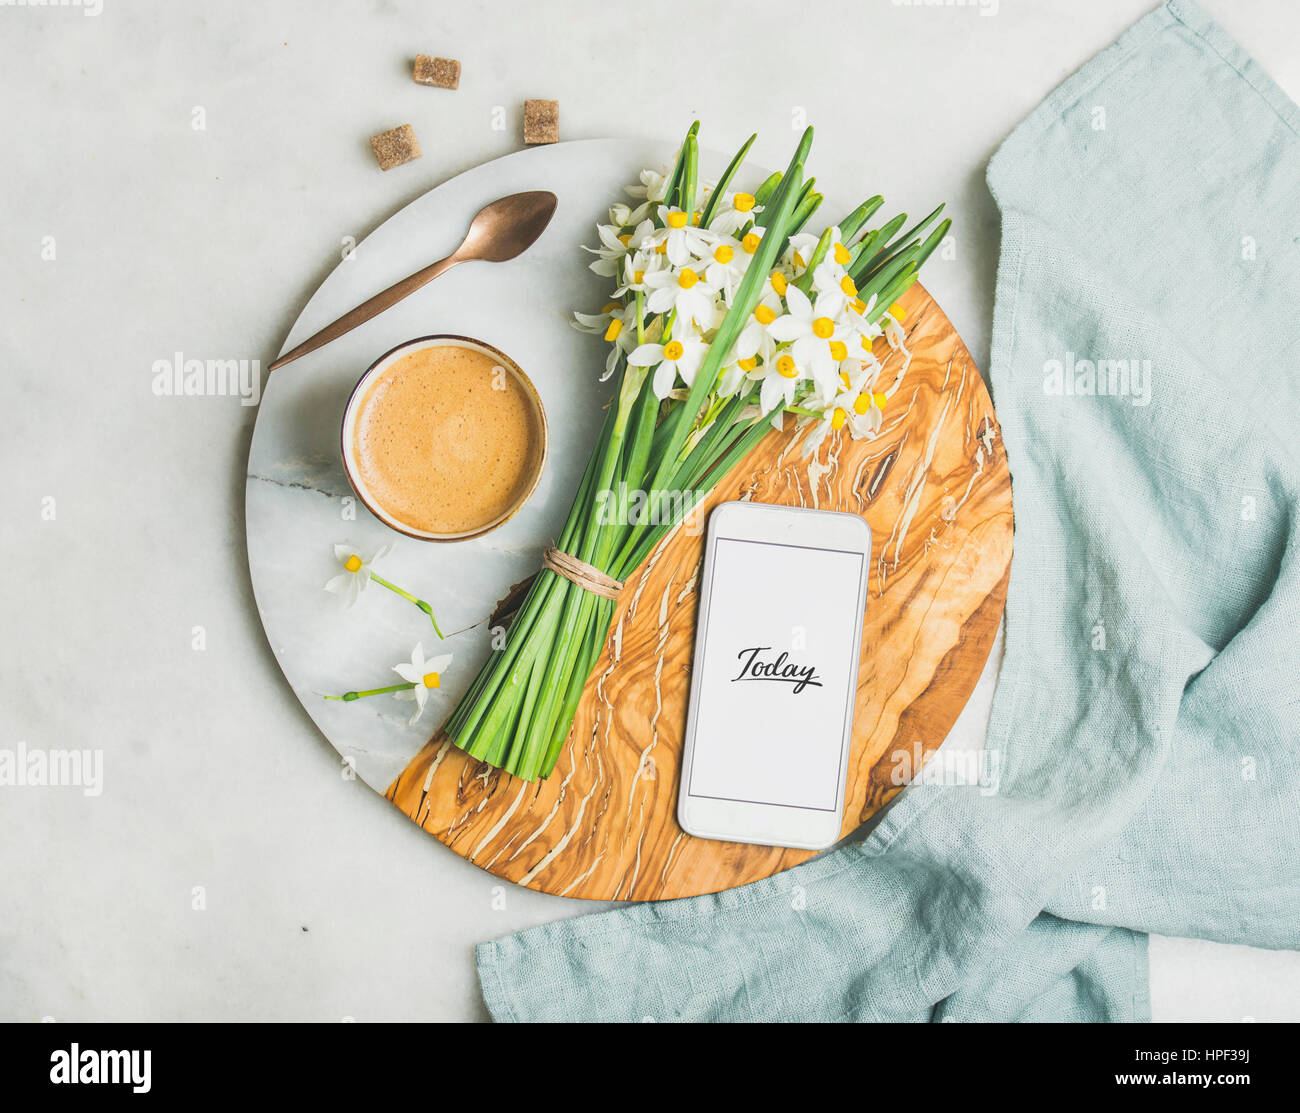 Cup of morning coffee, bucket of spring flowers and mobile phone with text Today on serving board over light grey marble background, top view. Morning Stock Photo